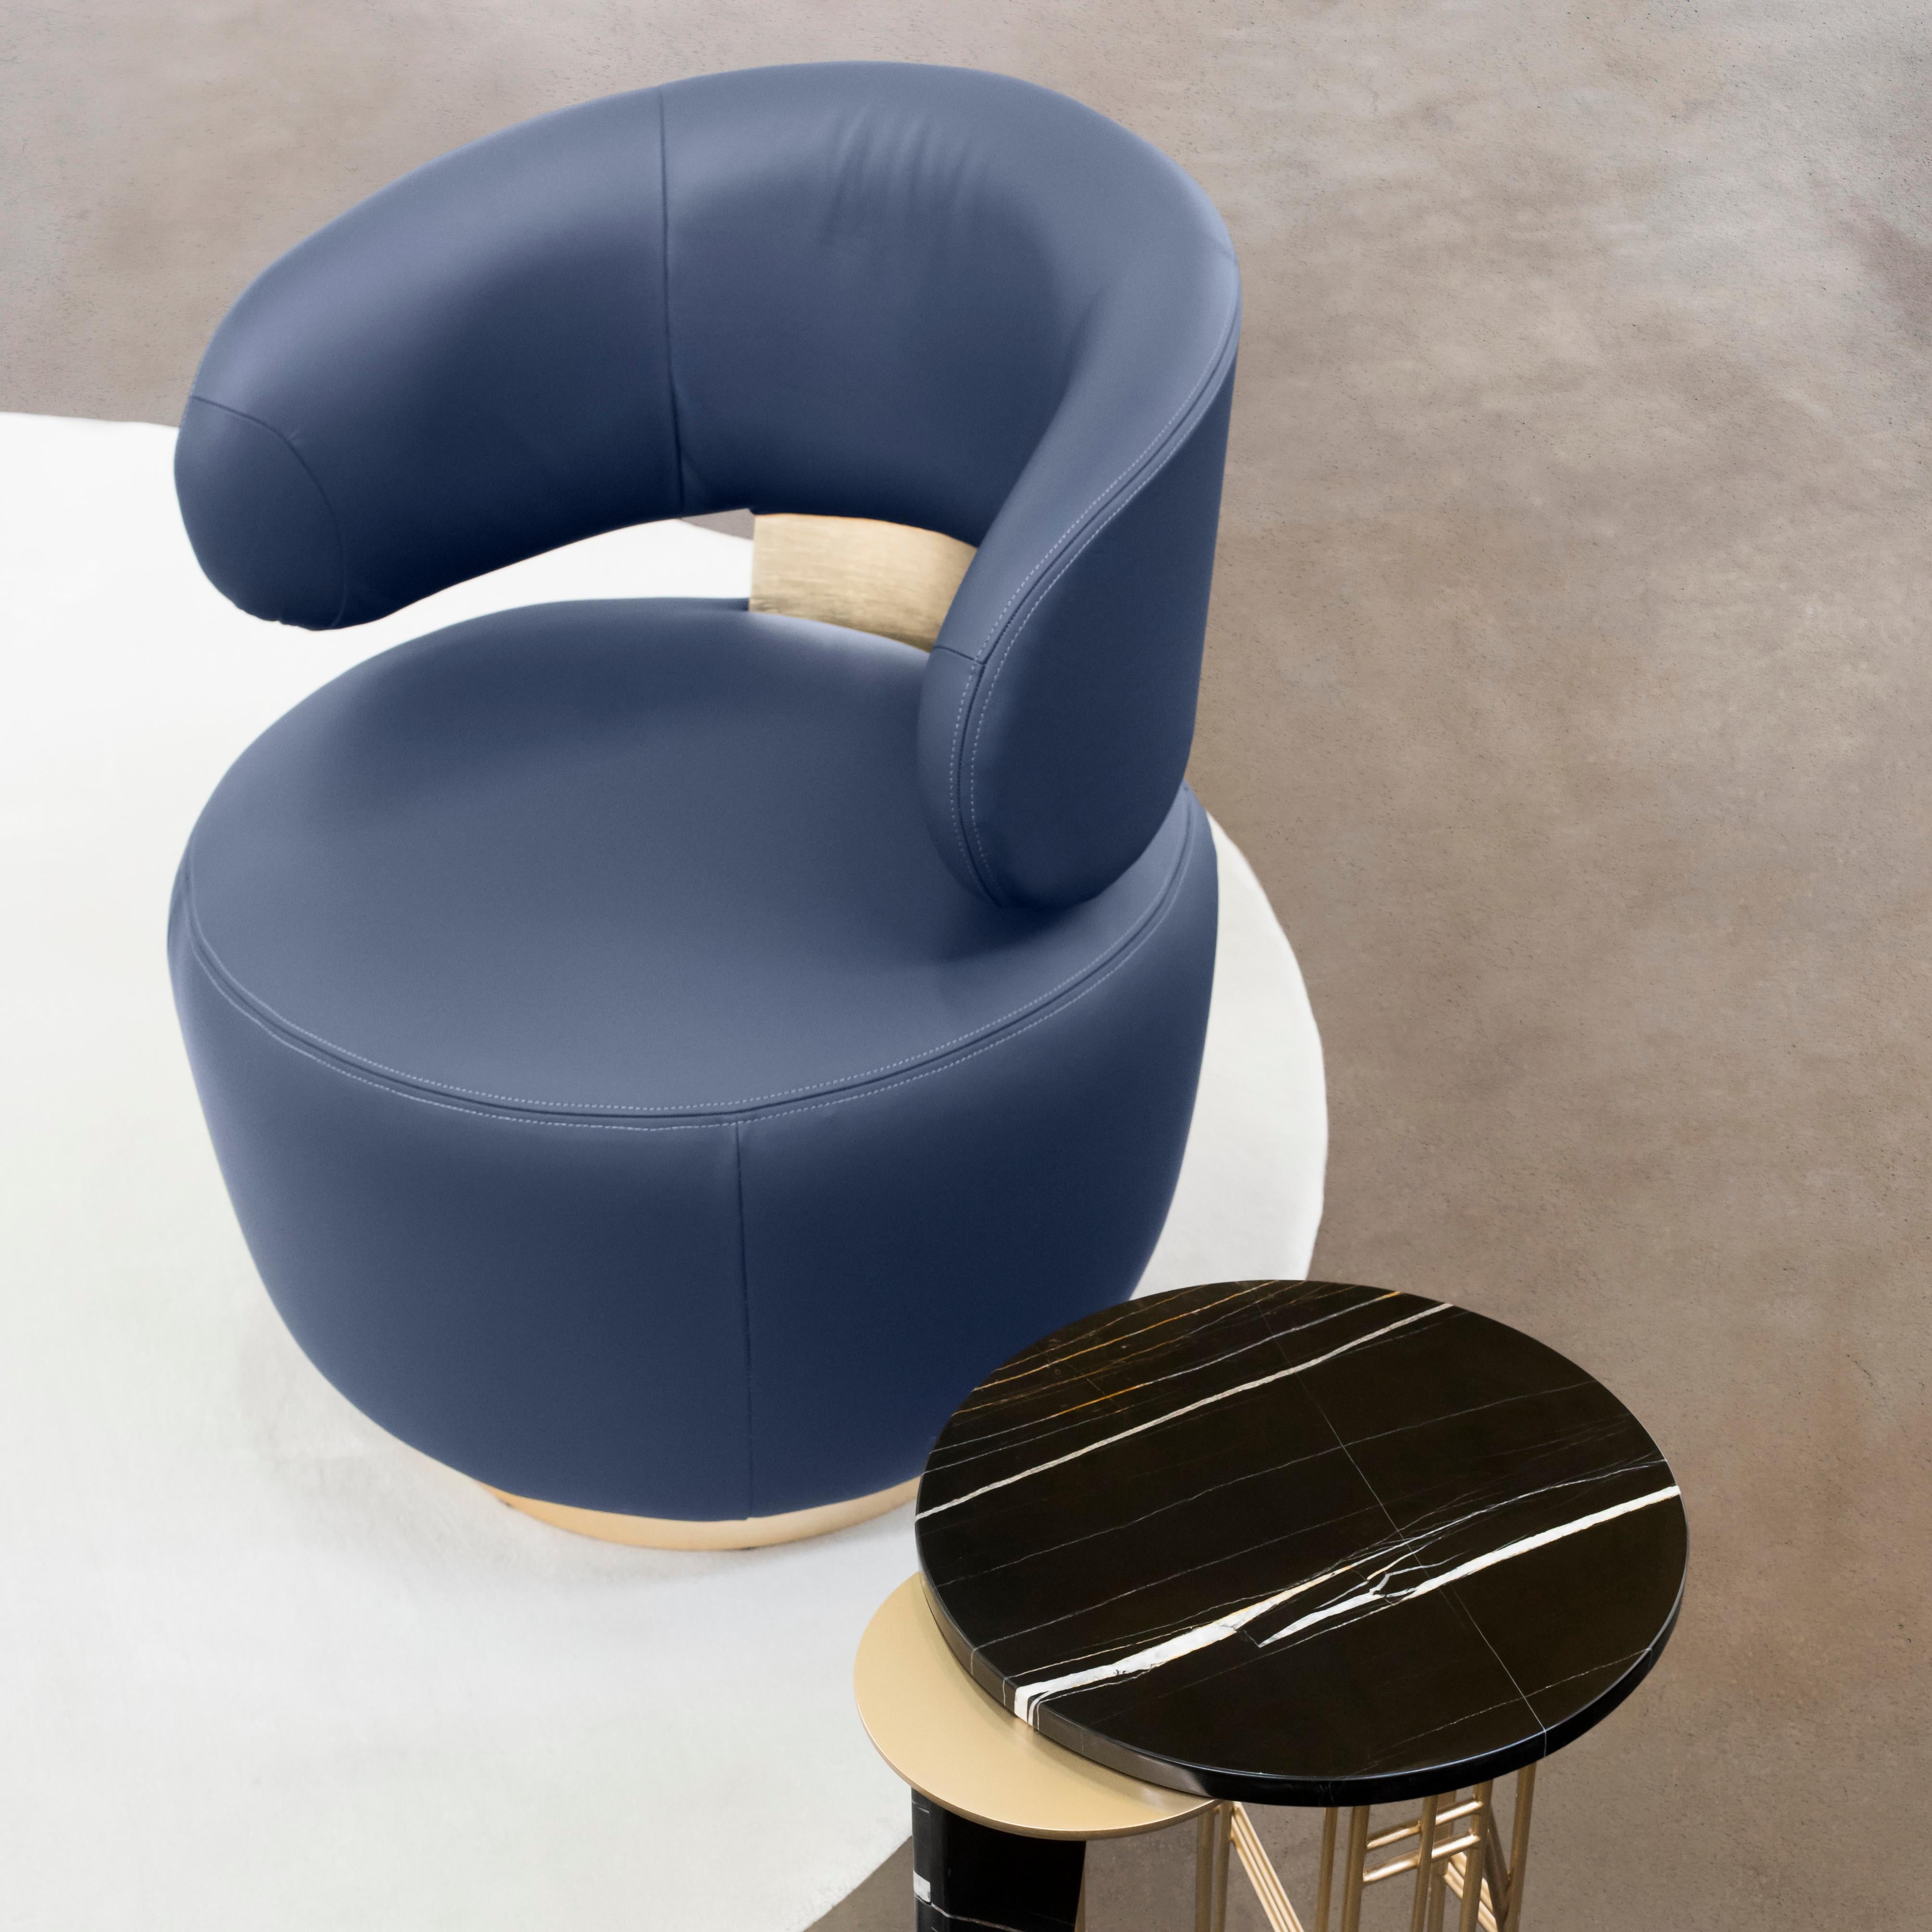 Caju Swivel Lounge Chair, Contemporary Collection, Handcrafted in Portugal - Europe by Greenapple.

The Caju lounge chair stands as a trendy furniture piece that personifies the organic shape of a cashew. Upholstered in Italian leather, the design